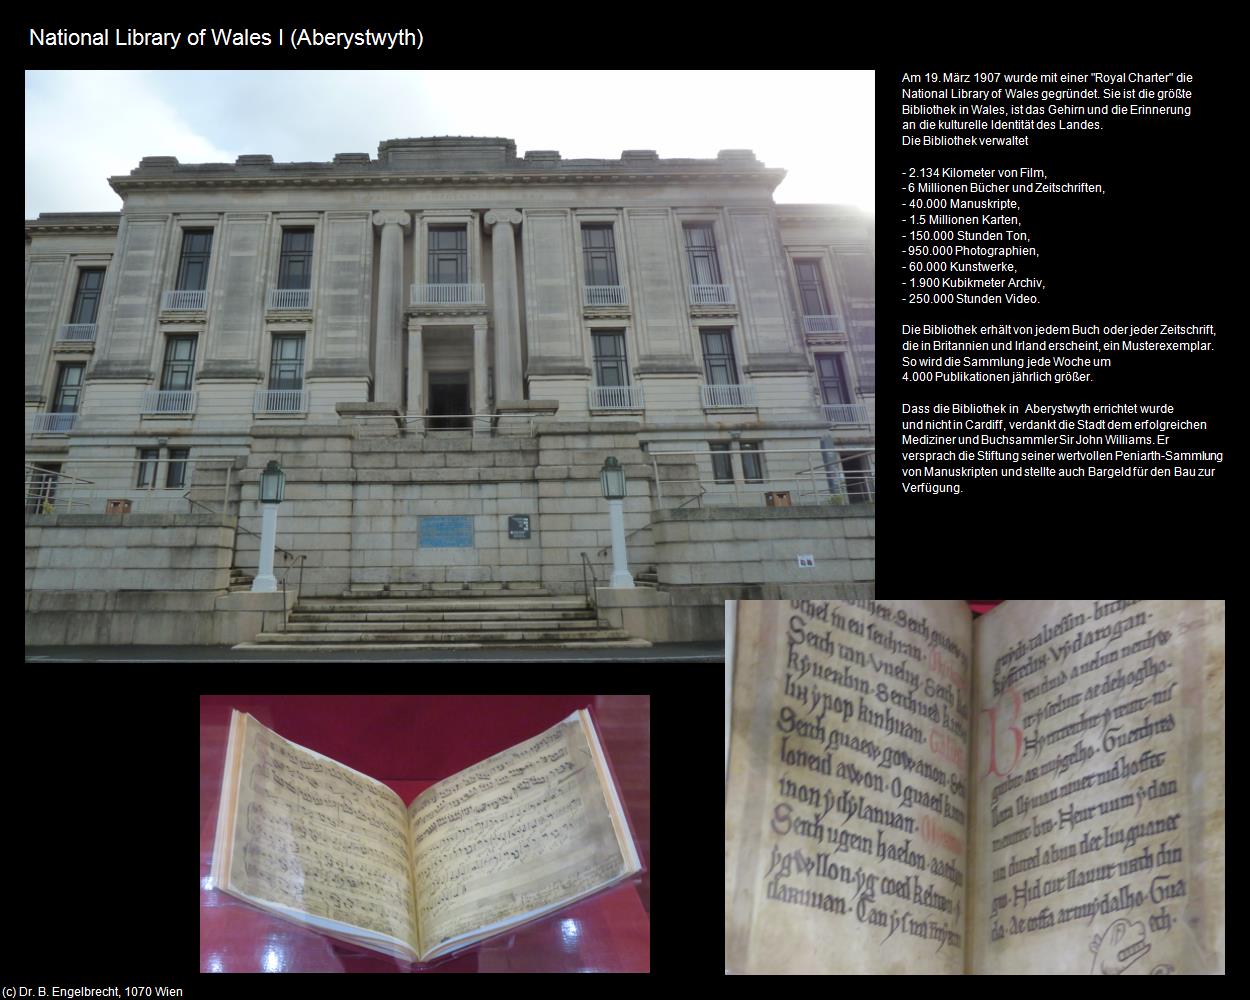 National Library of Wales I  (Aberystwyth, Wales) in Kulturatlas-ENGLAND und WALES